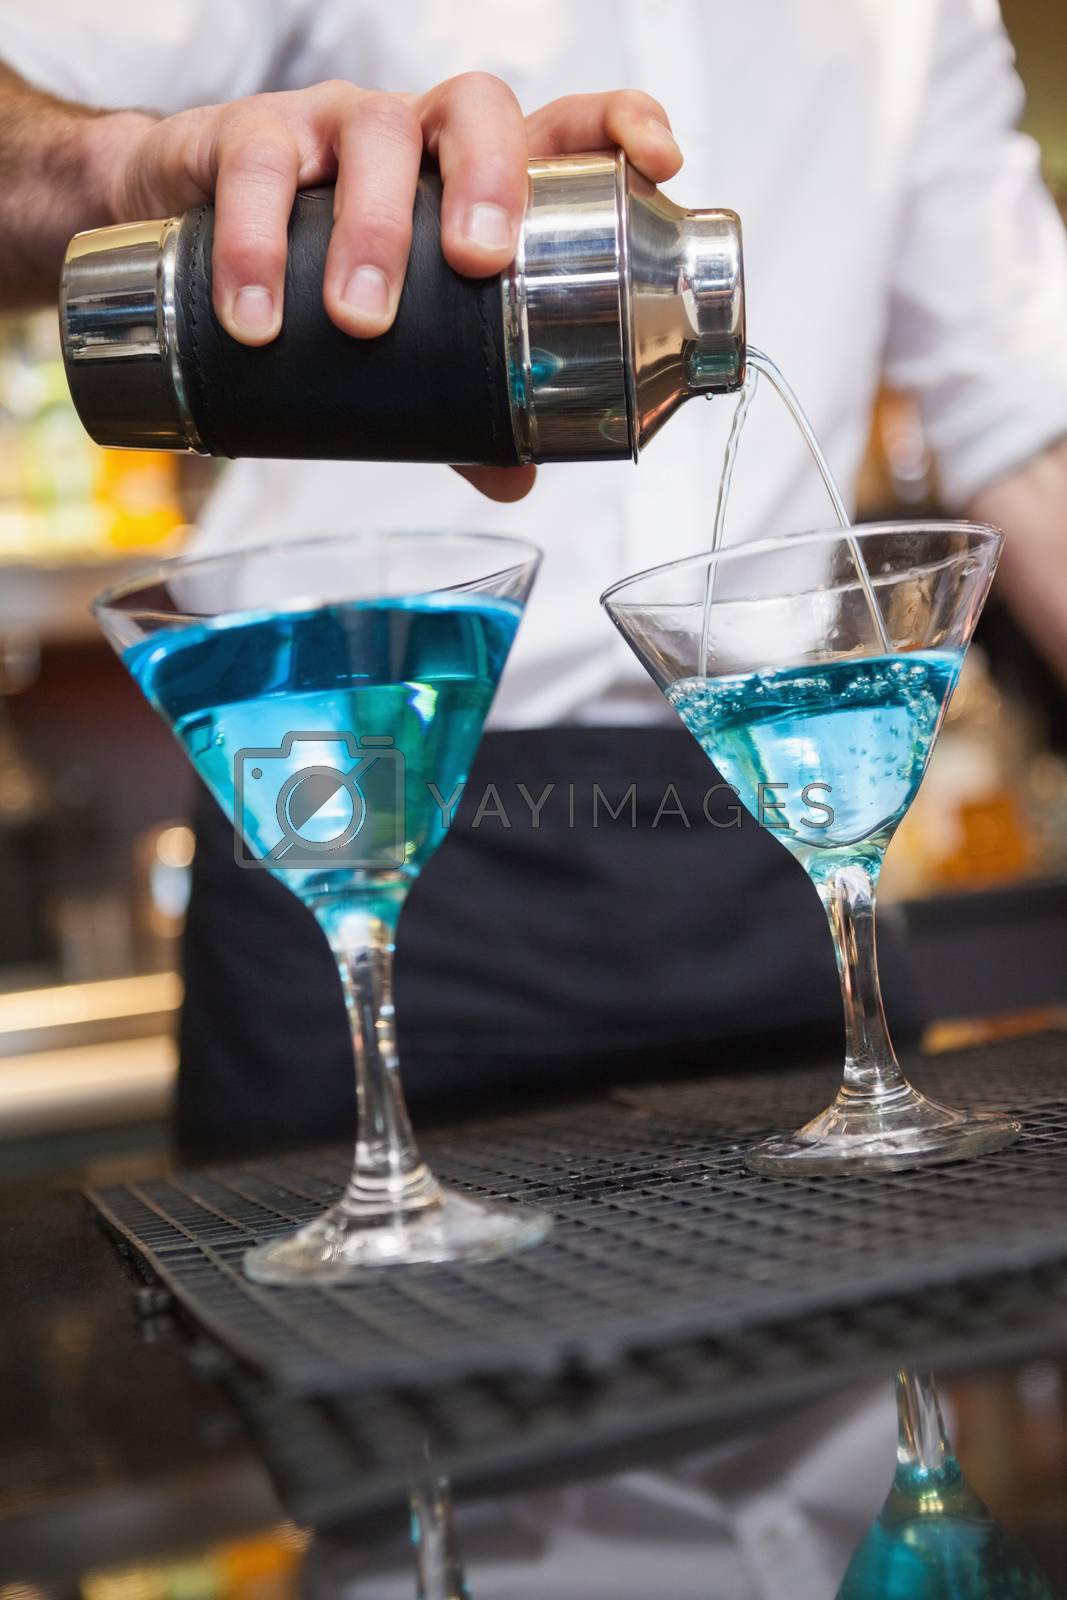 Royalty free image of Bartender pouring cocktail into glasses by Wavebreakmedia